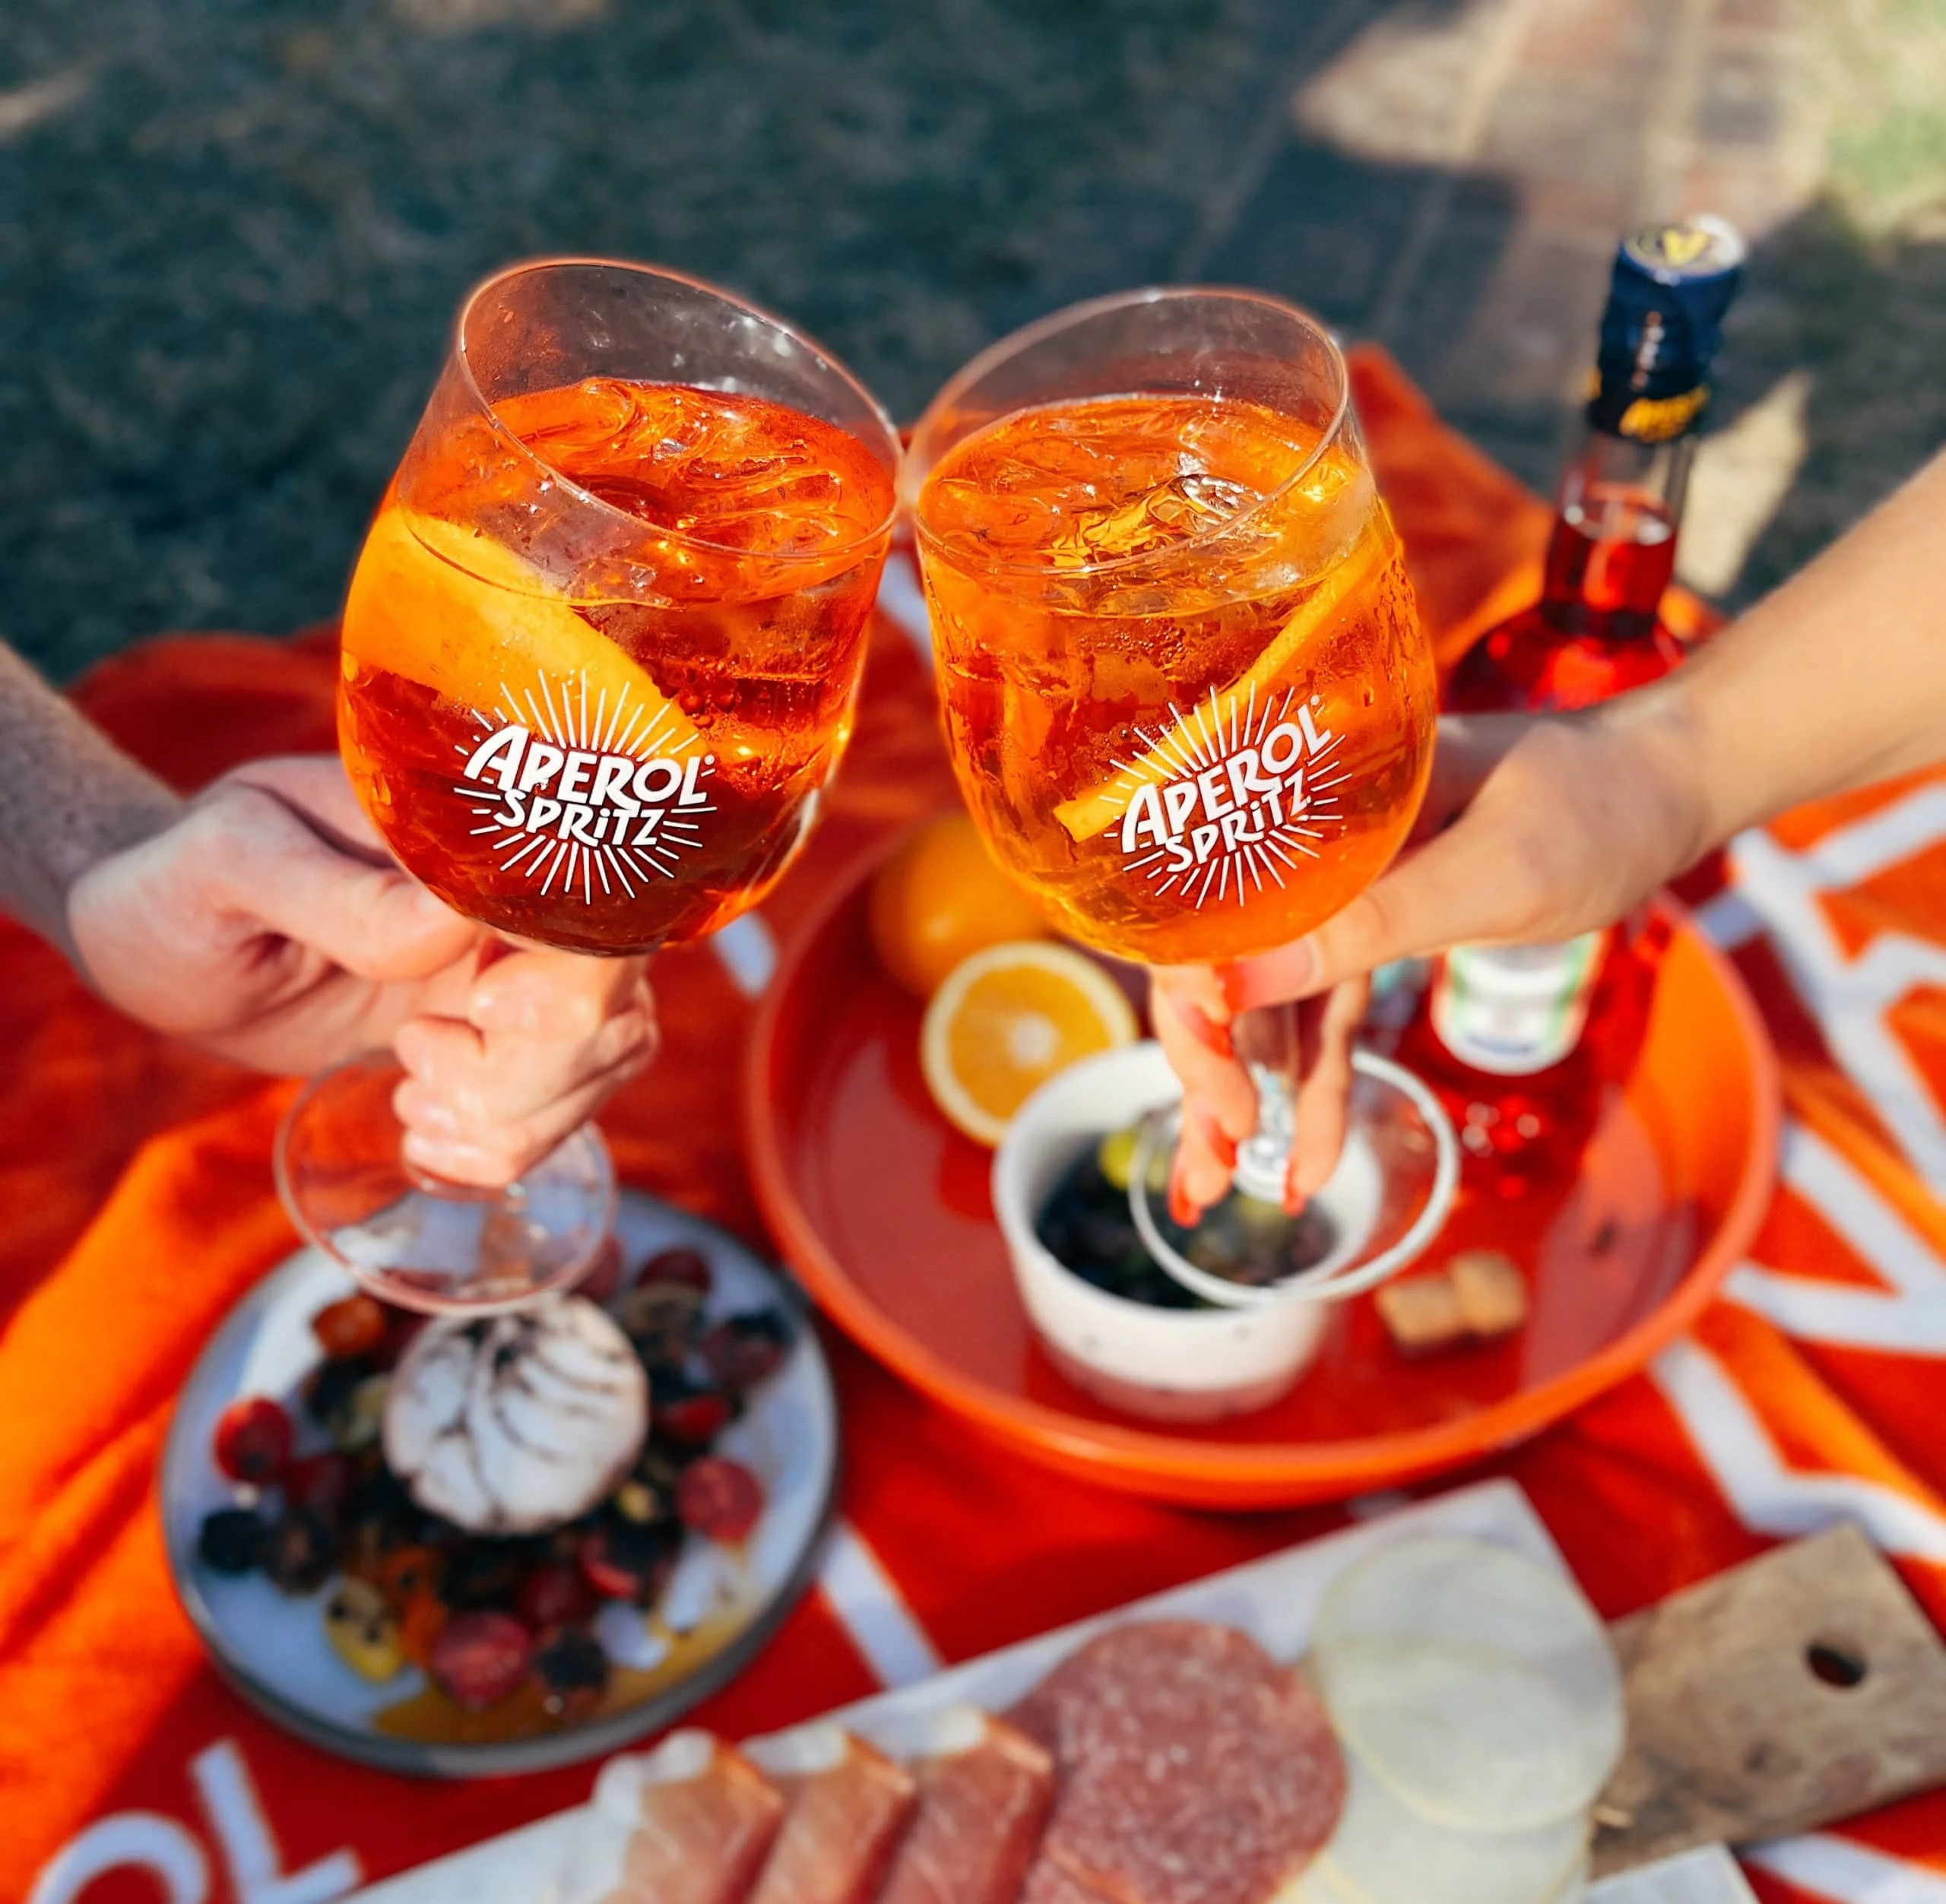 Aperol-Spritz-picnic-in-the-park-scaled